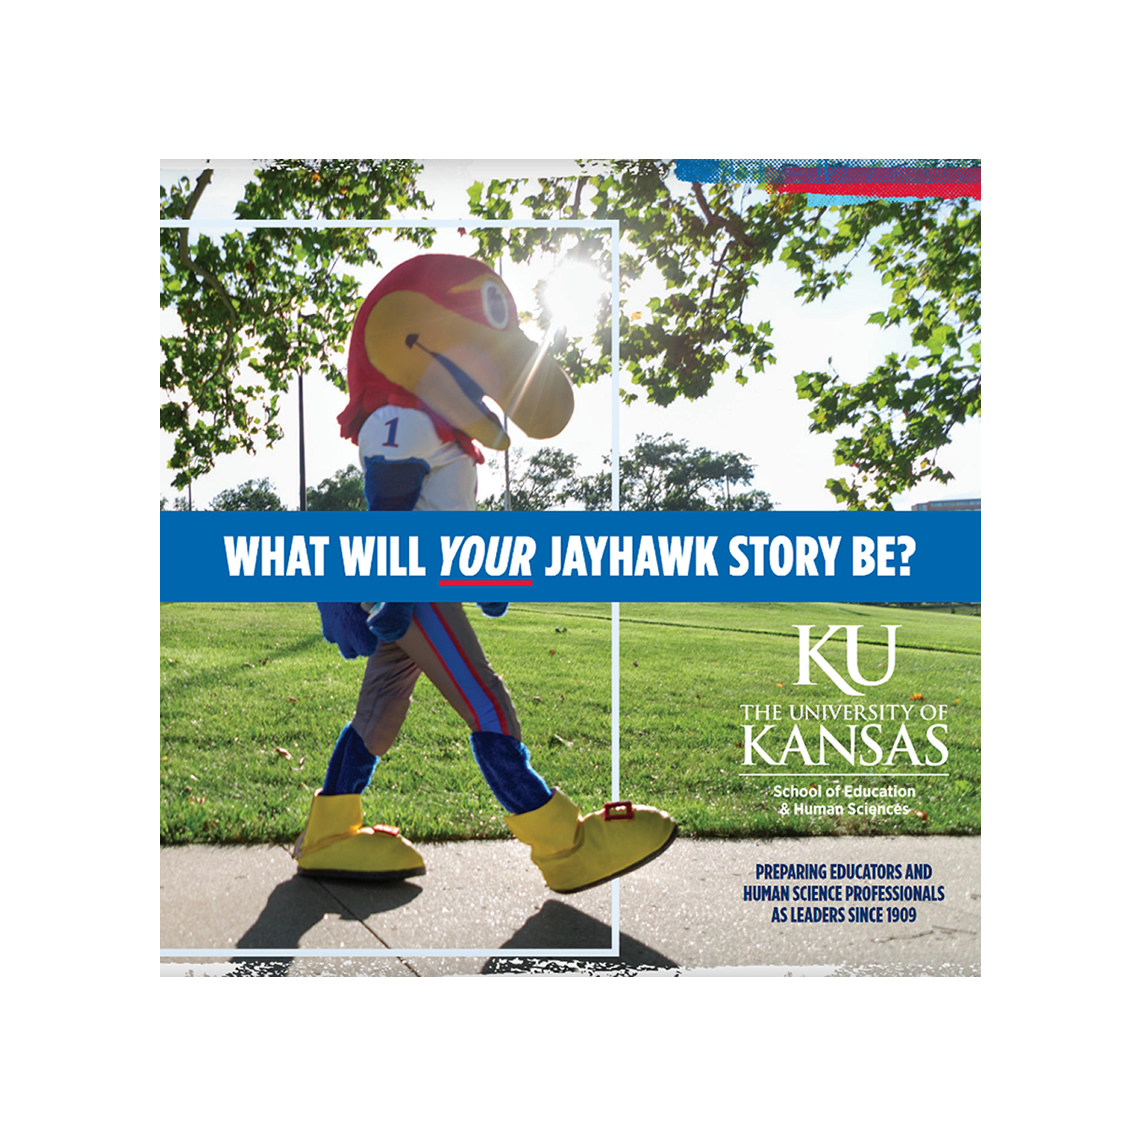 Image of Jayhawk walking down a sidewalk on KU Campus. The text reads: What will your Jayhawk Story Be? Preparing Educators and Human Science Professionals as Leaders Since 1909; logo of KU School of Education and Human Sciences